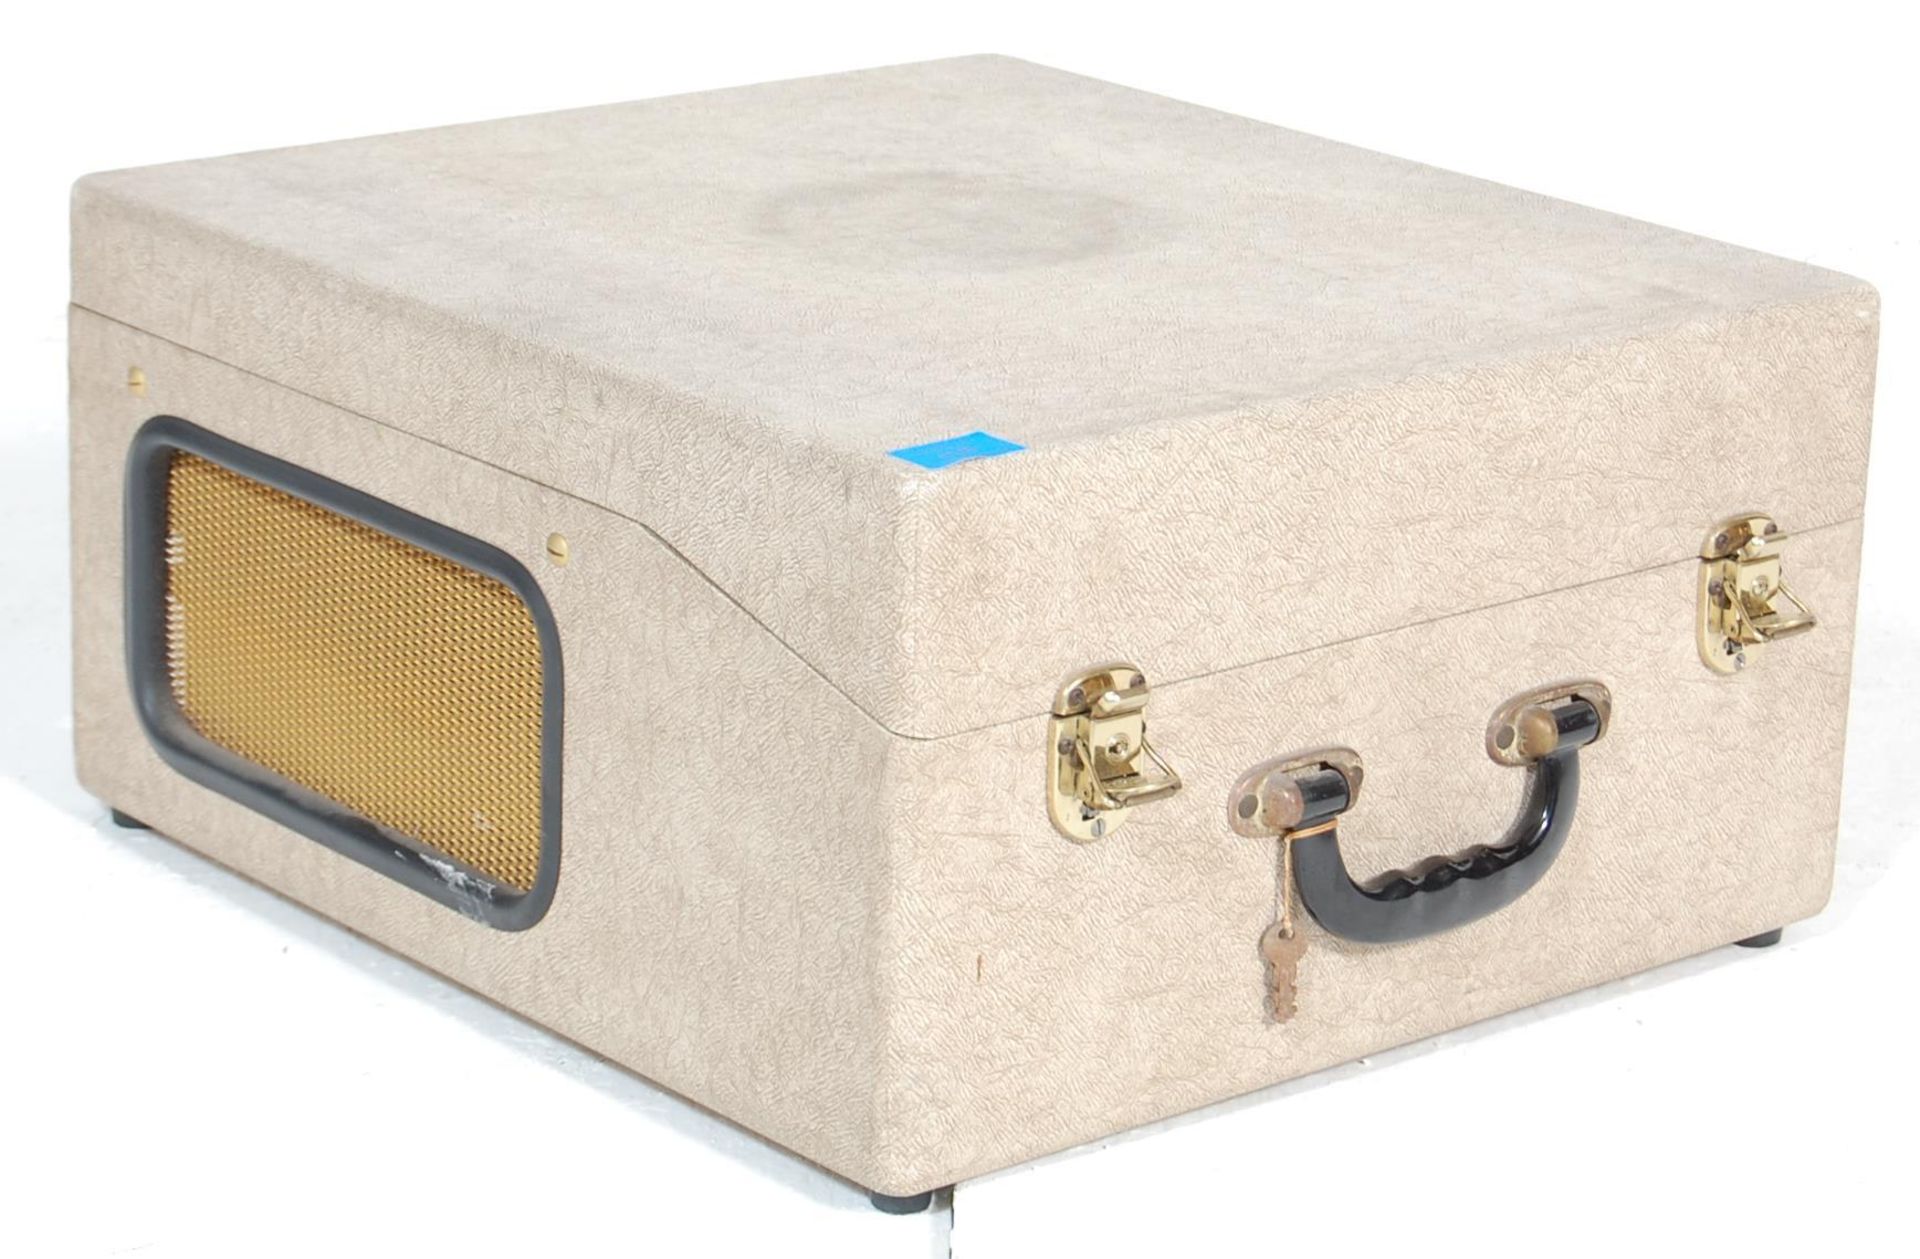 A retro vintage Brenell Mark 5 portable reel to reel tape recorder housed in a beige carry case.